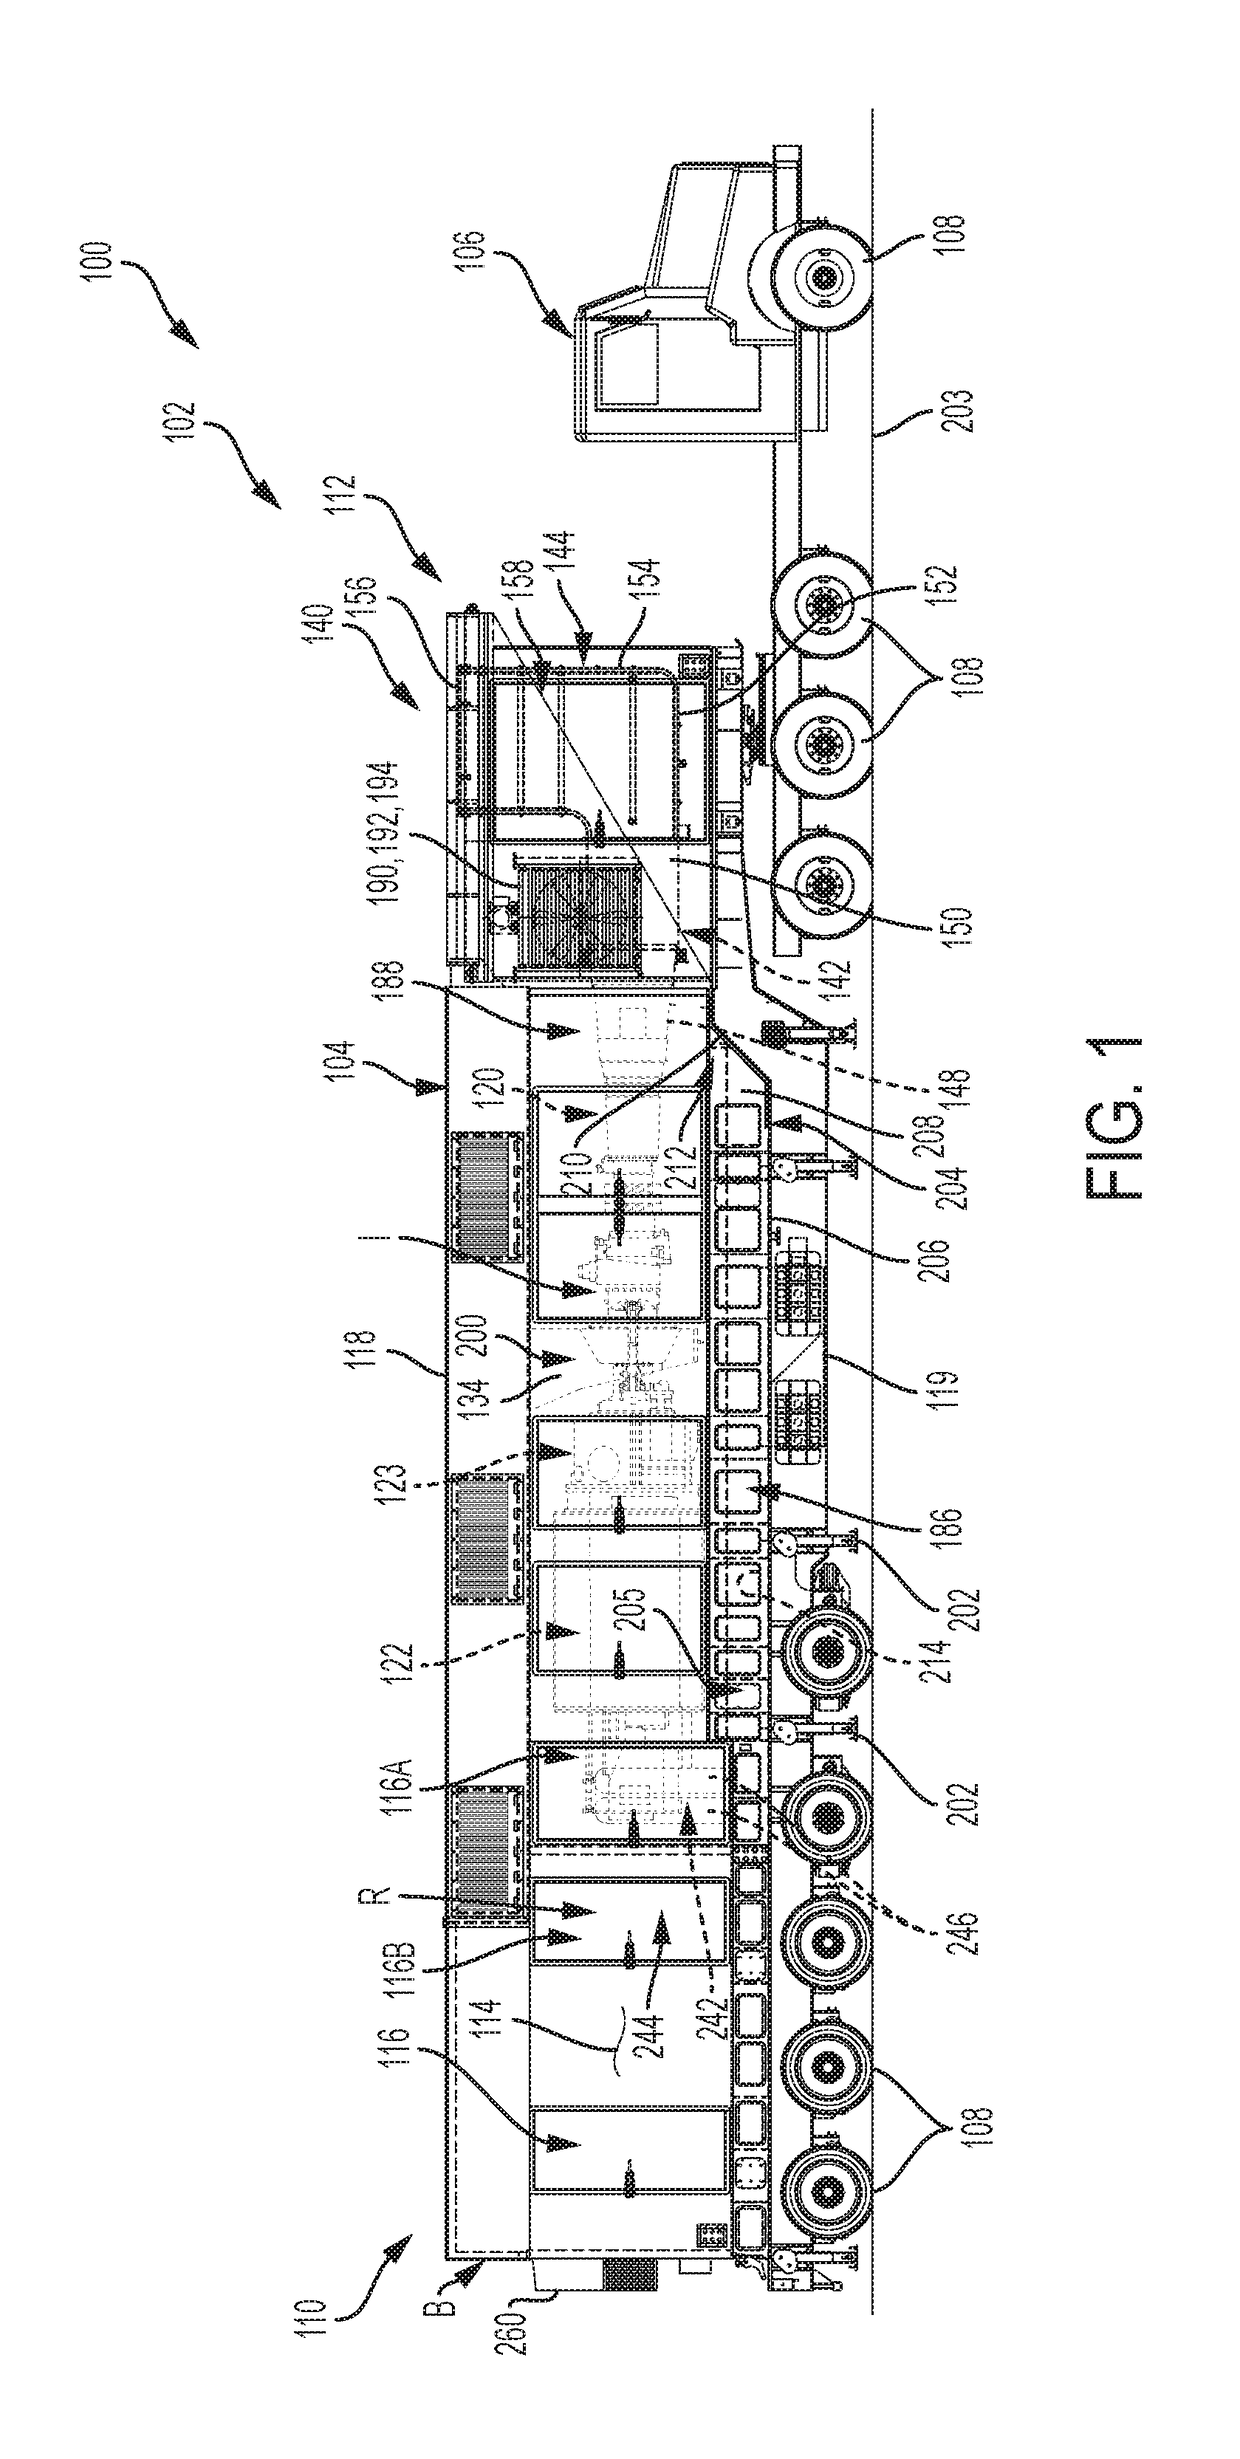 Mobile power generation system including noise attenuation